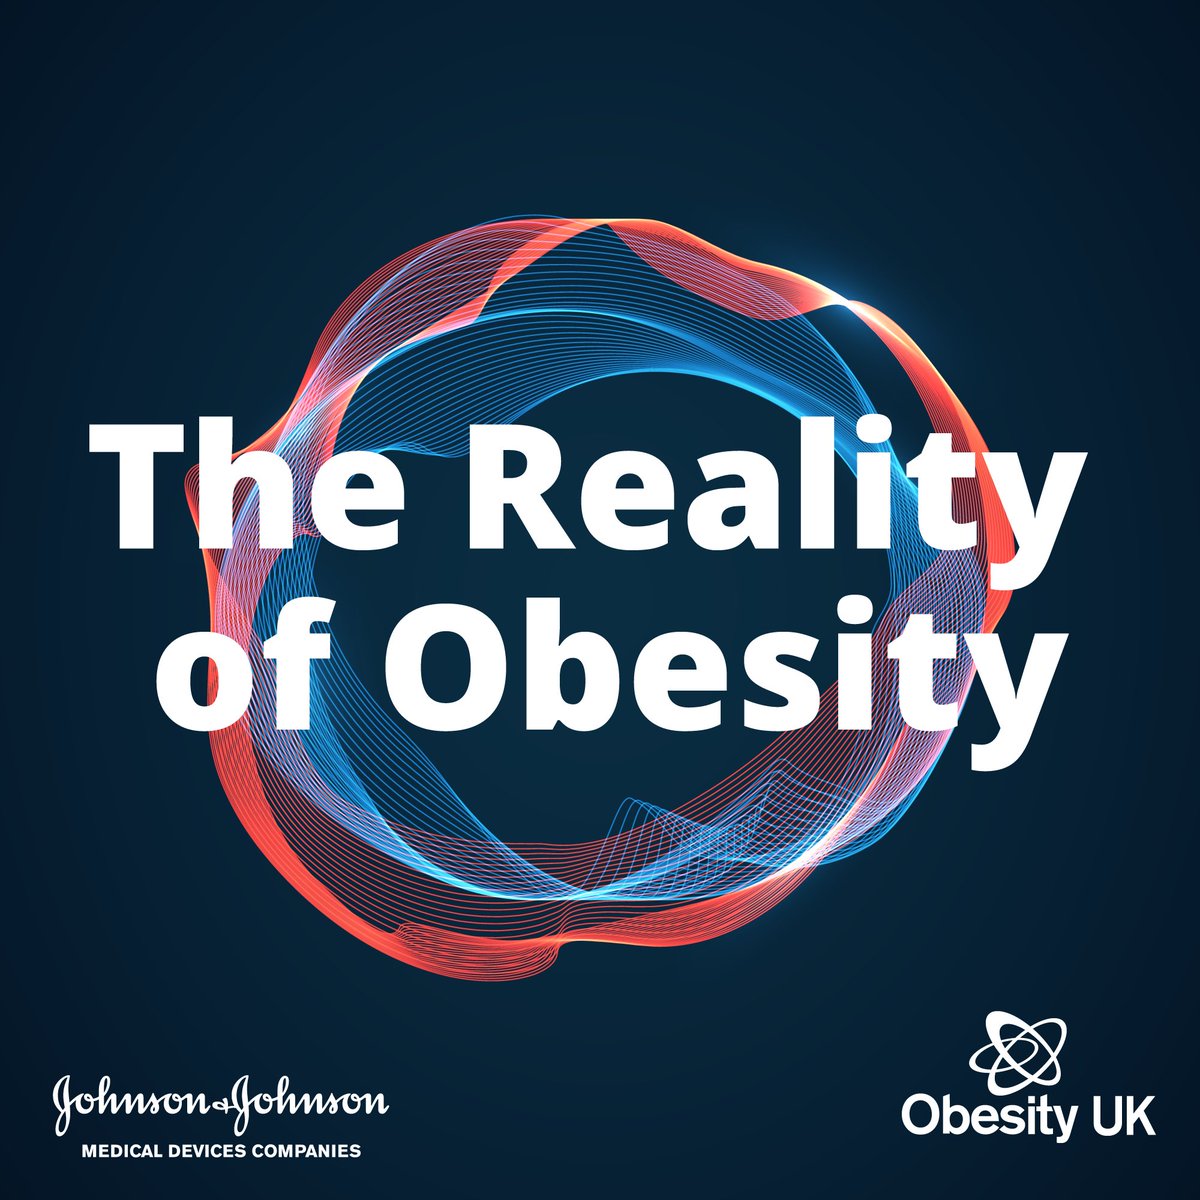 Exciting News! On #WorldObesityDay, we are launching a podcast series called “The Reality of Obesity”. There are 5 episodes, released every Thursday starting tomorrow and are available on Apple, Spotify & Google (1/3) #obesity #EveryBodyNeedsEverybody #supportnotstigma